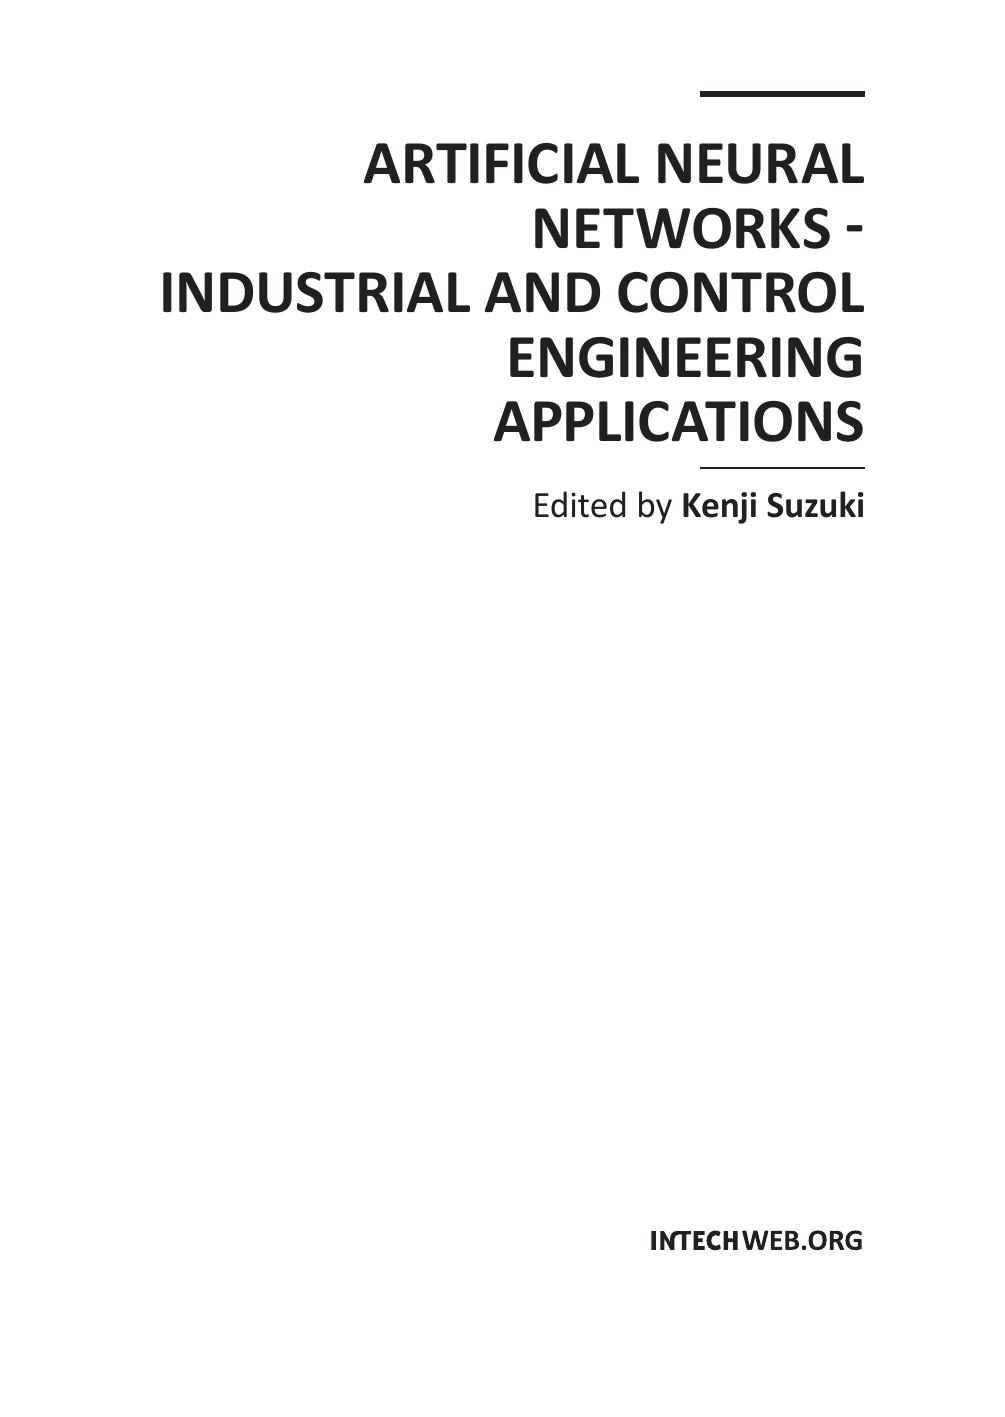 Artificial Neural Networks - Industrial and Control Engineering Applications.indd